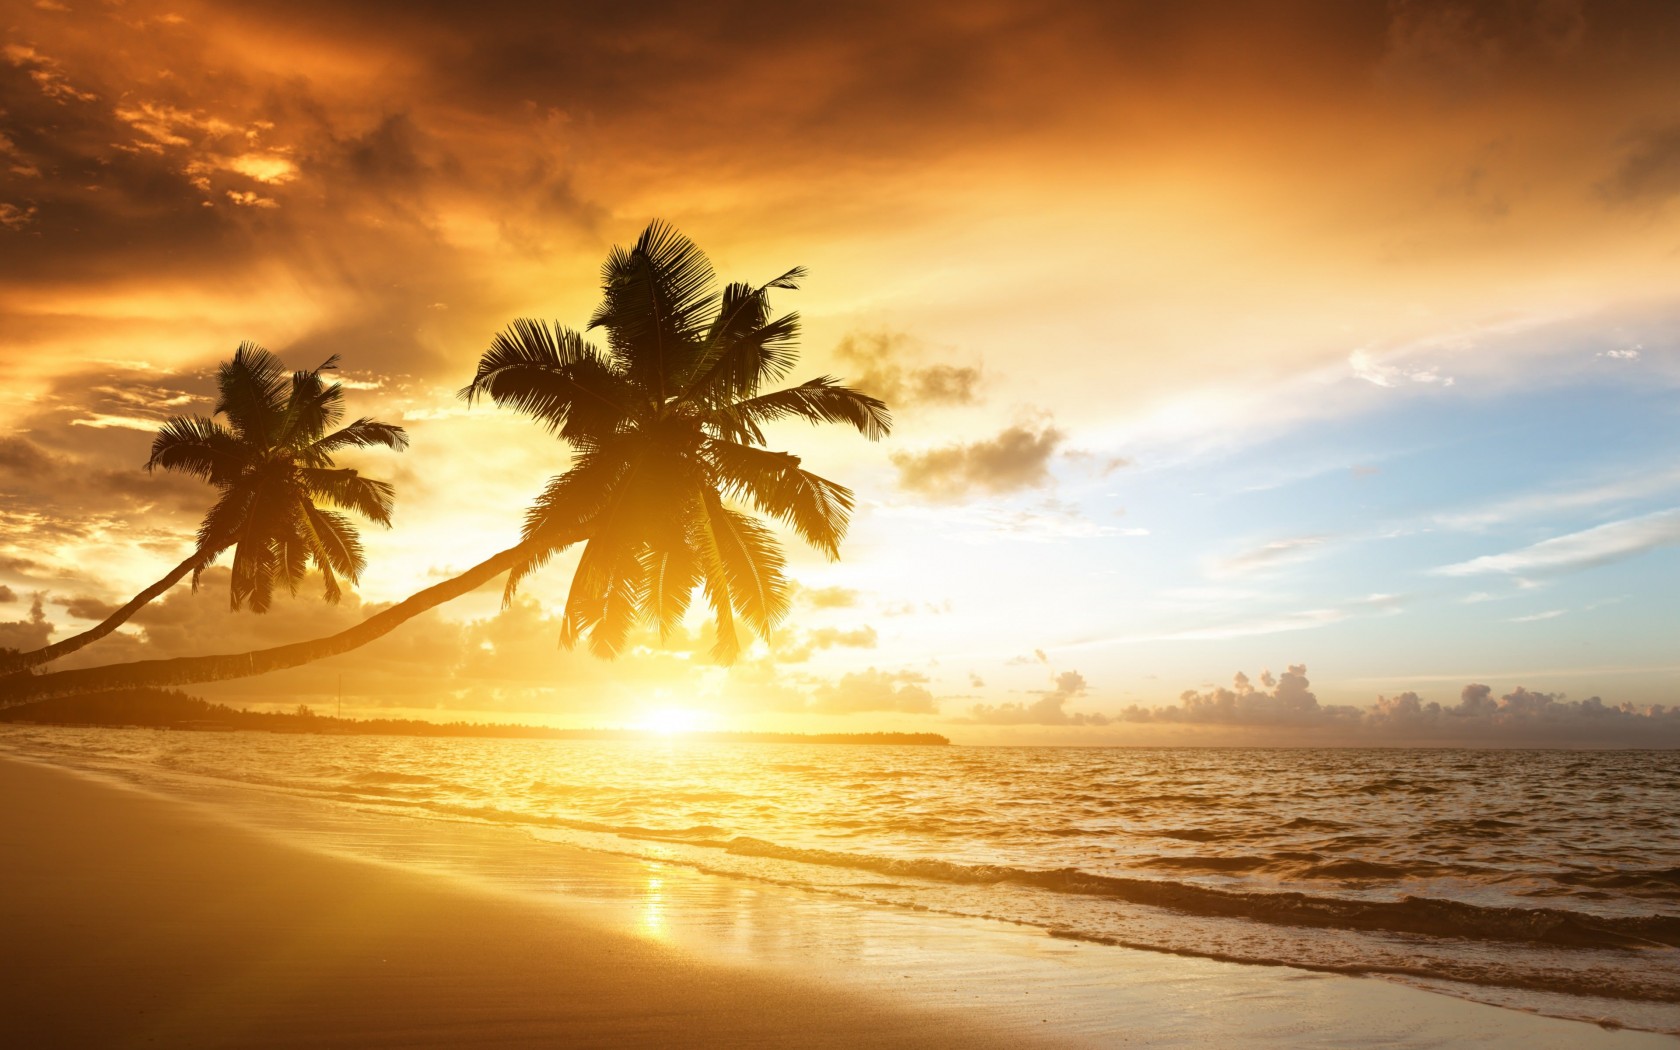 Beach With Palm Trees At Sunset Wallpaper for Desktop 1680x1050